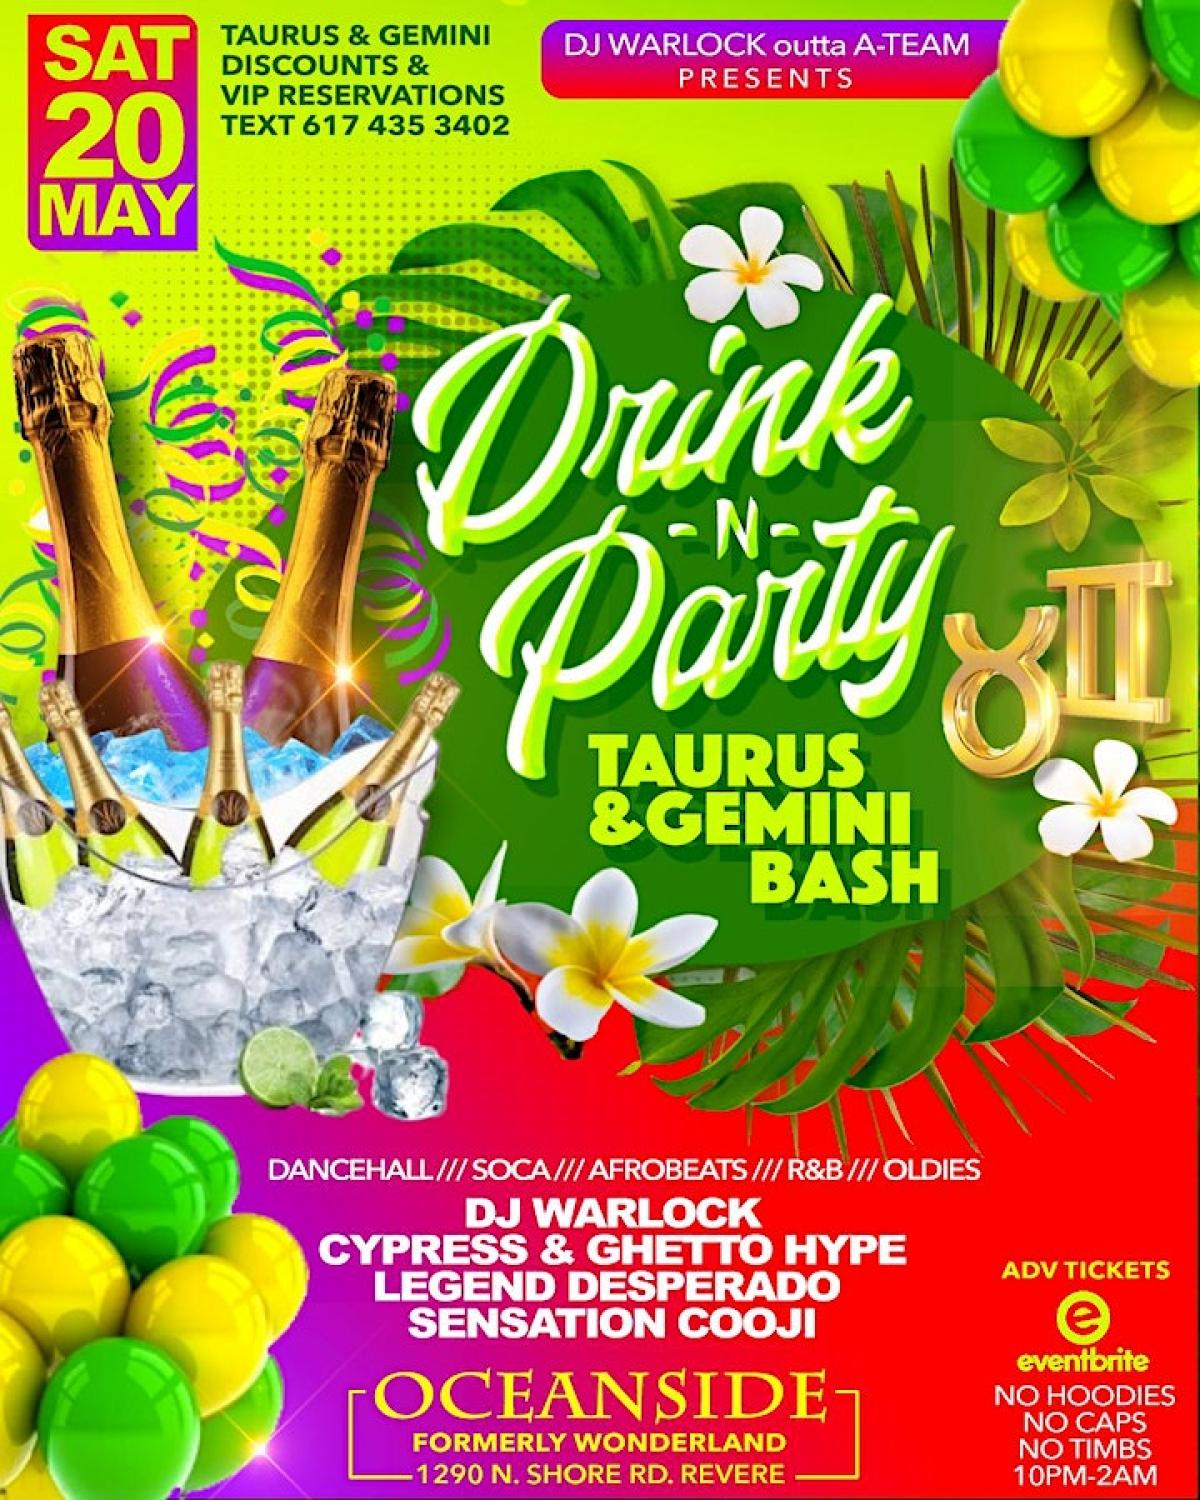 Drink And Party: Taurus & Gemini Bash flyer or graphic.